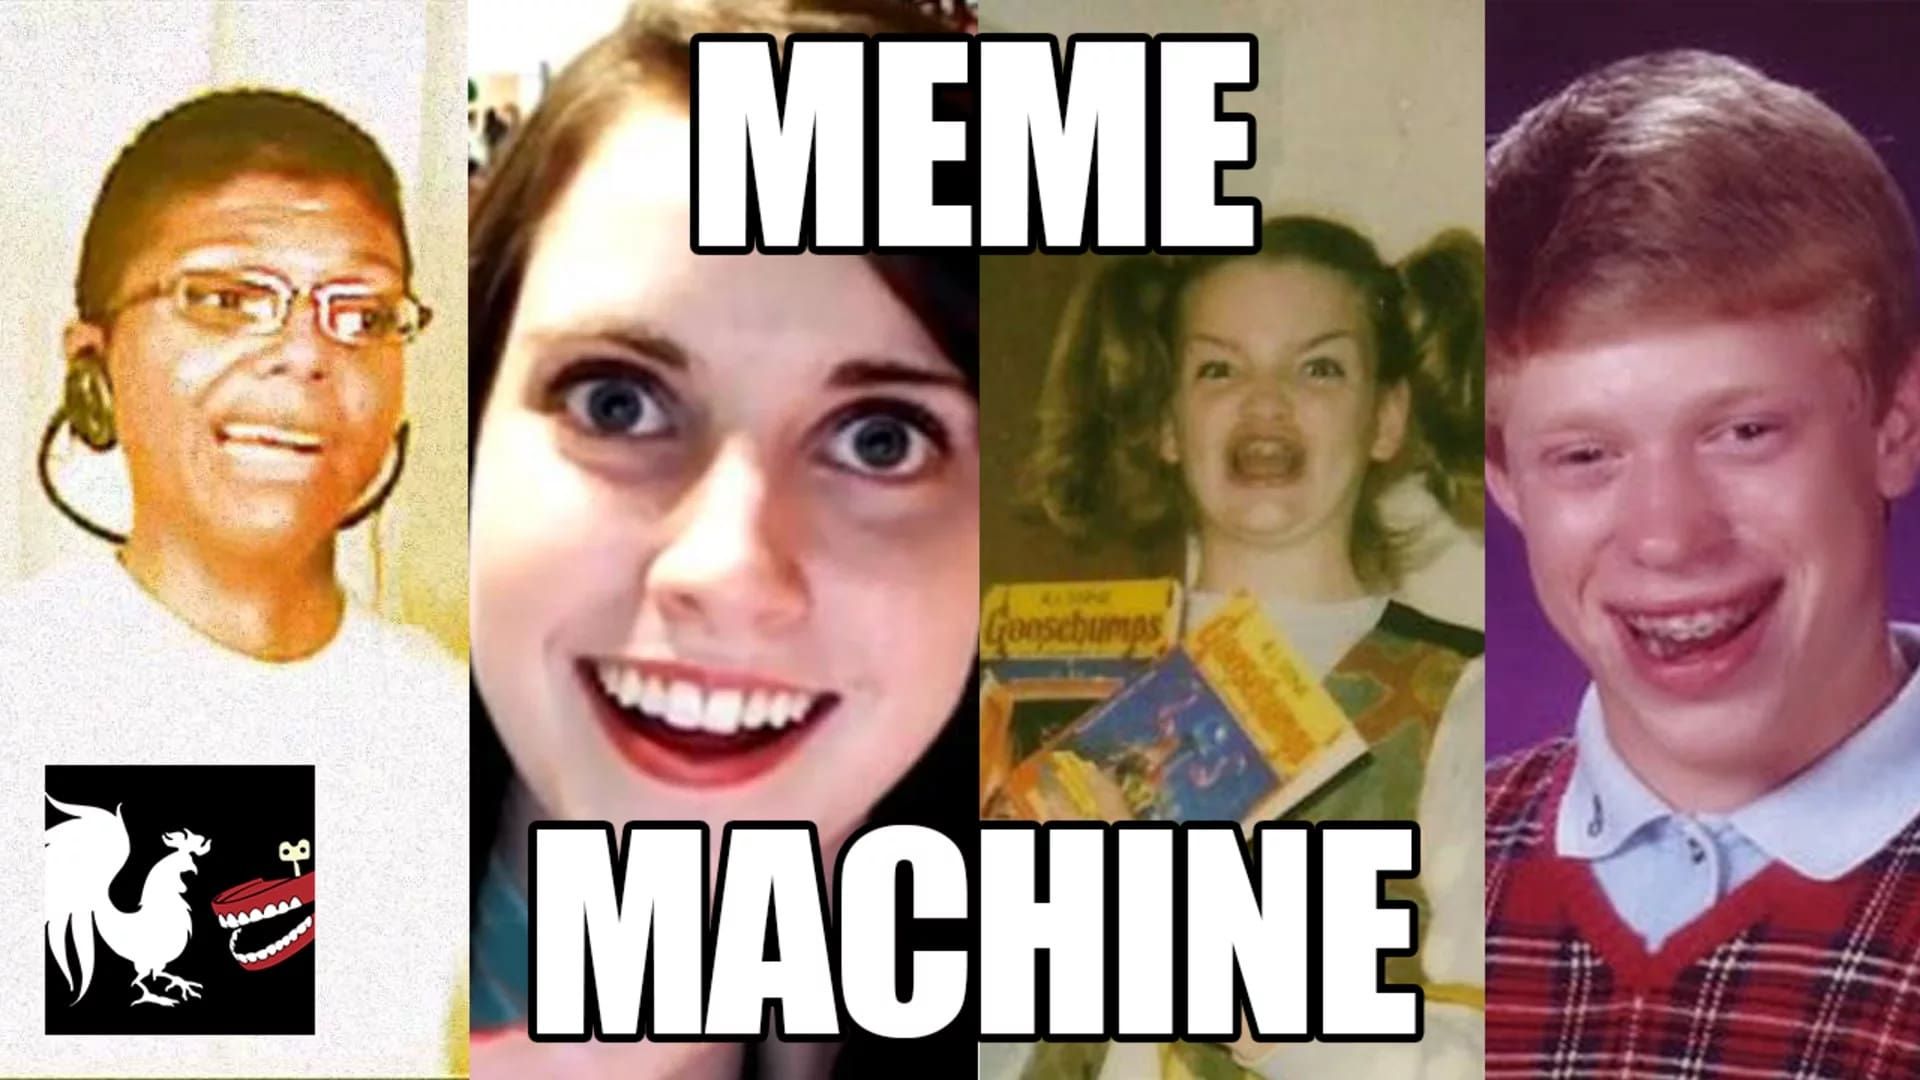 The Meme Machine: What Happens When the Internet Chooses You background